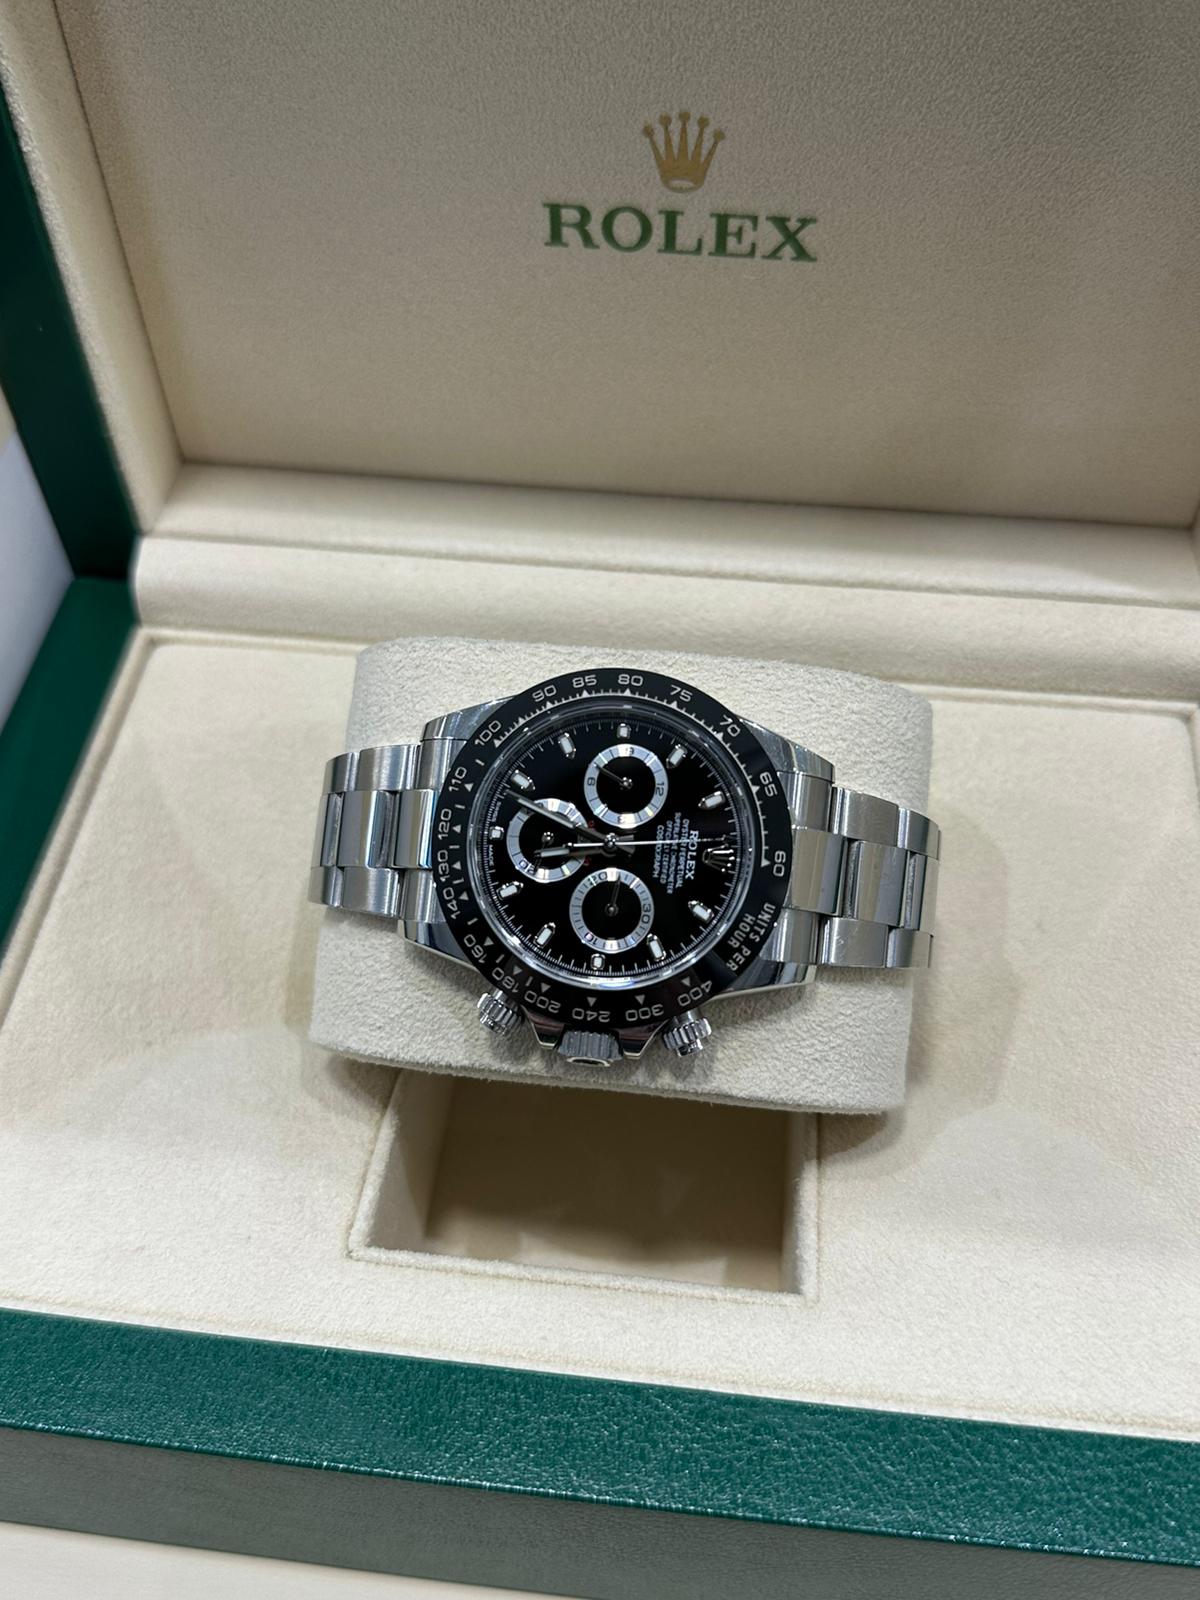 Rolex Daytona Ceramic Black 116500LN 2020 complete with box and papers - Image 3 of 8